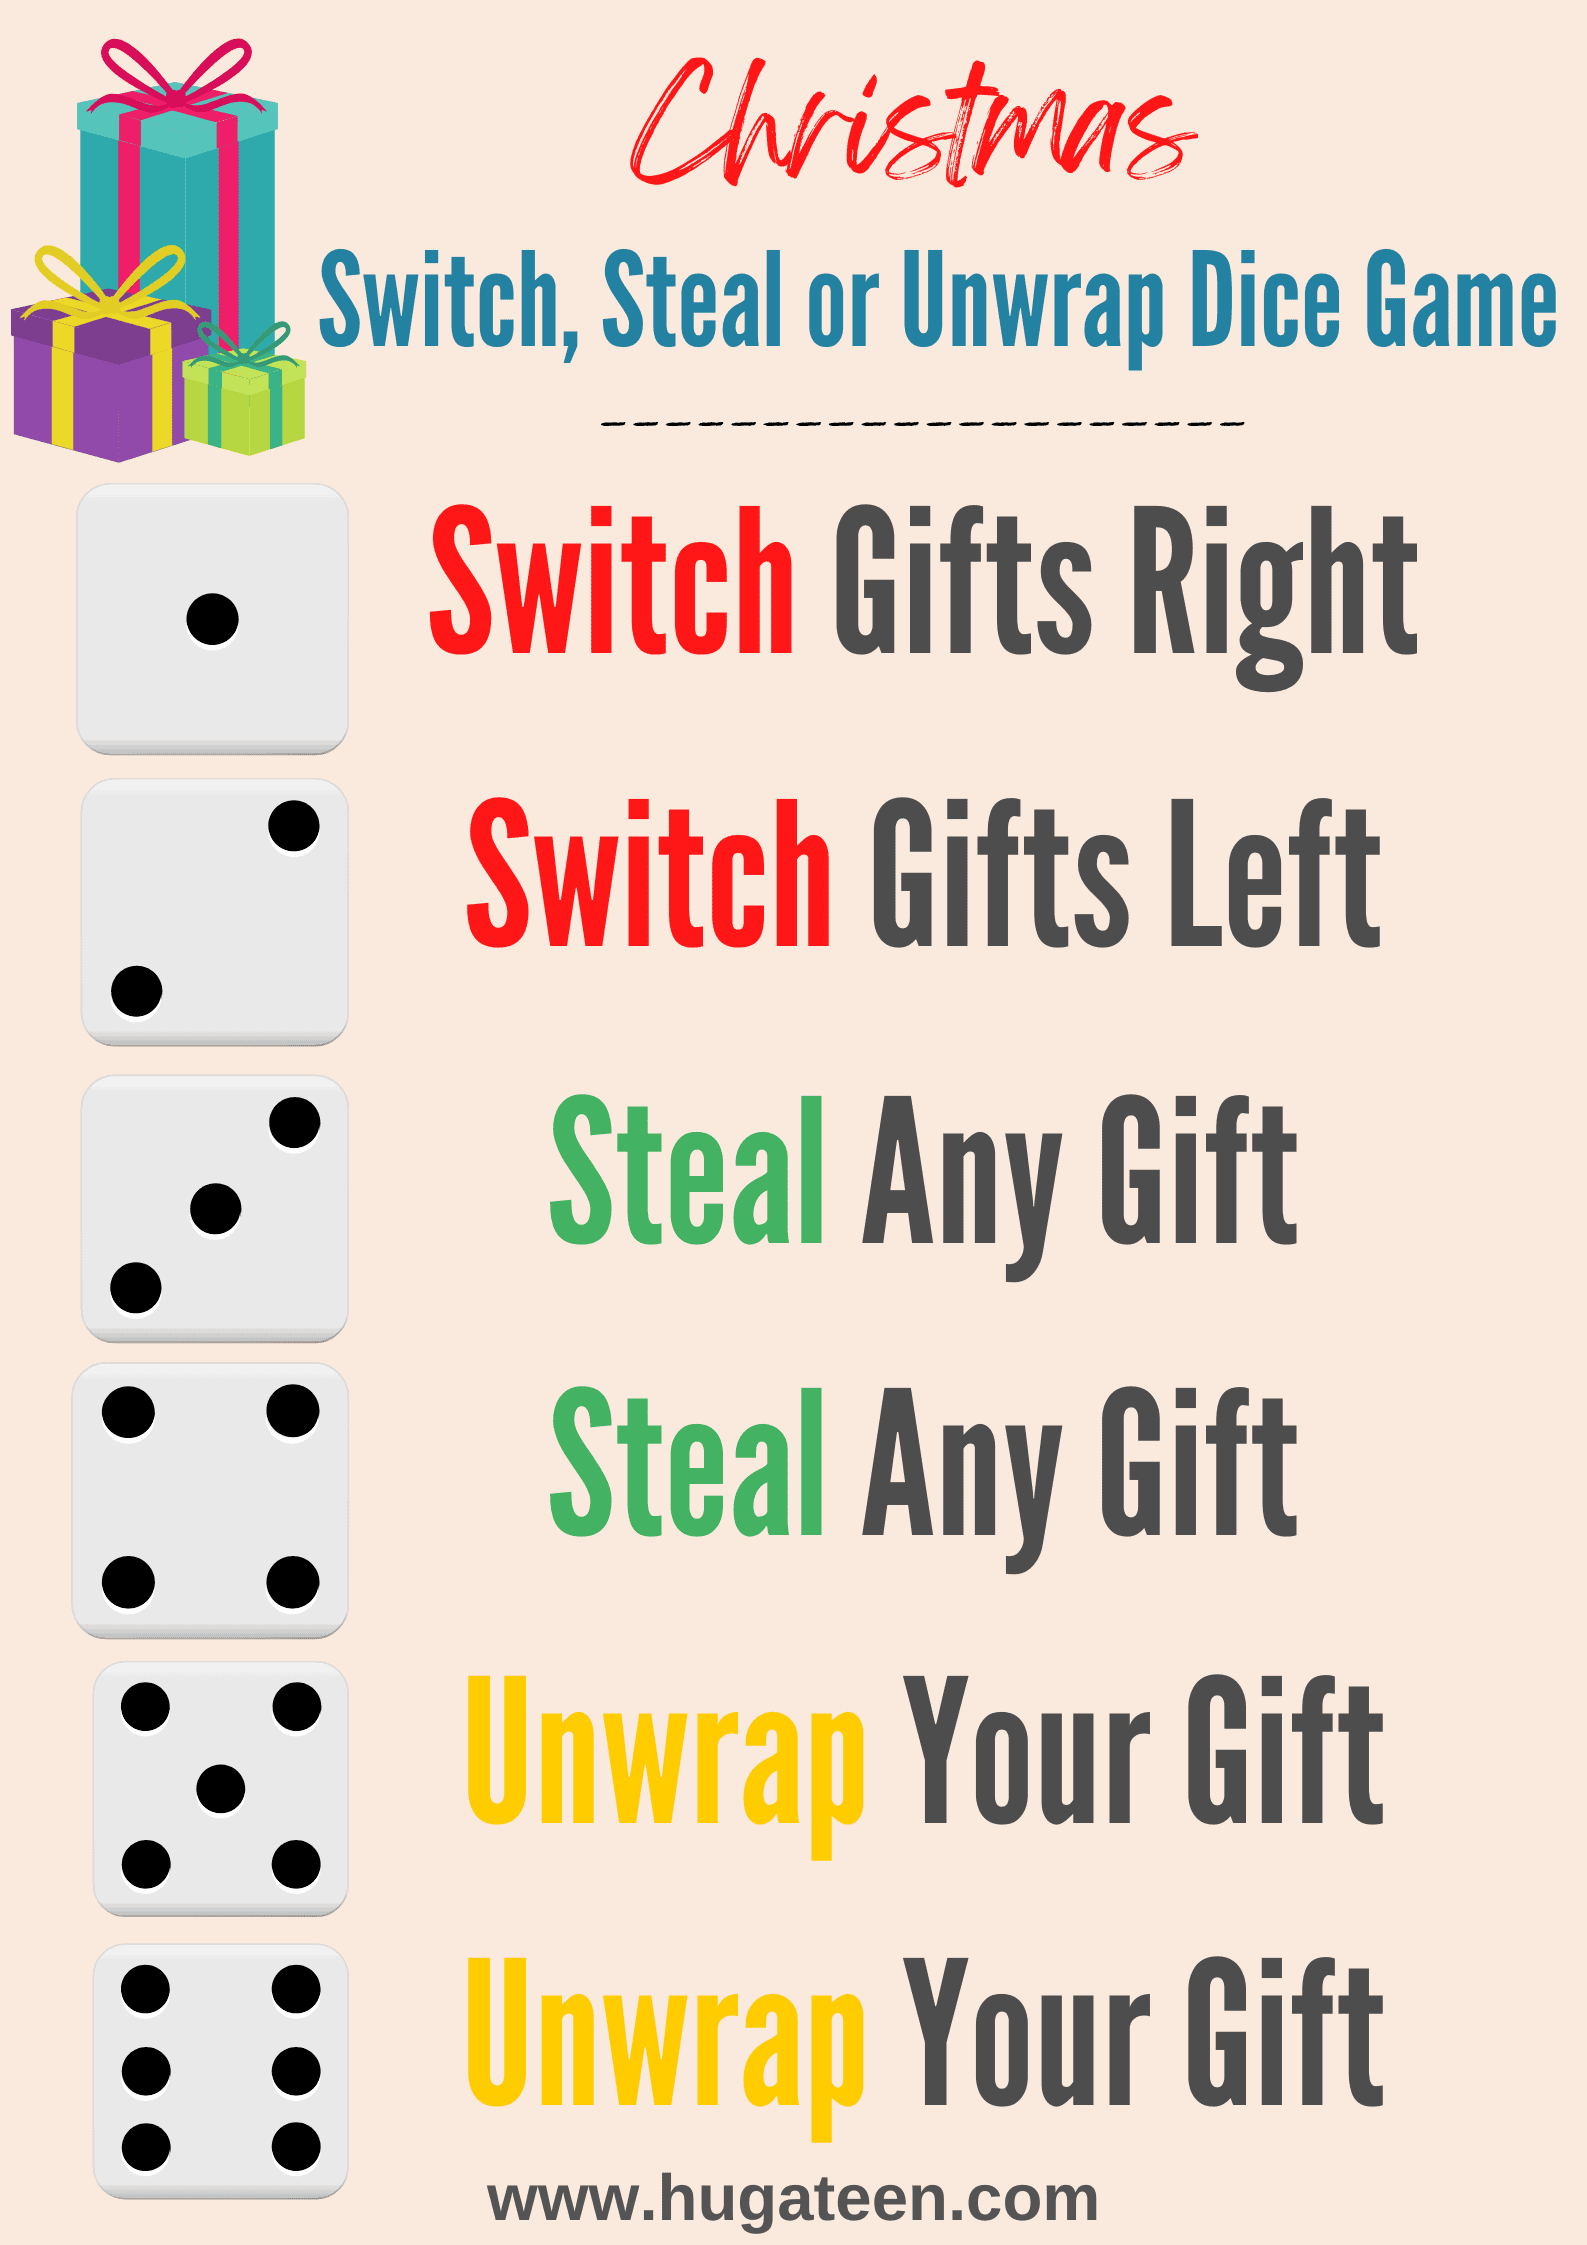 31 Popular Christmas Gift Exchange Ideas and Games | Real Simple